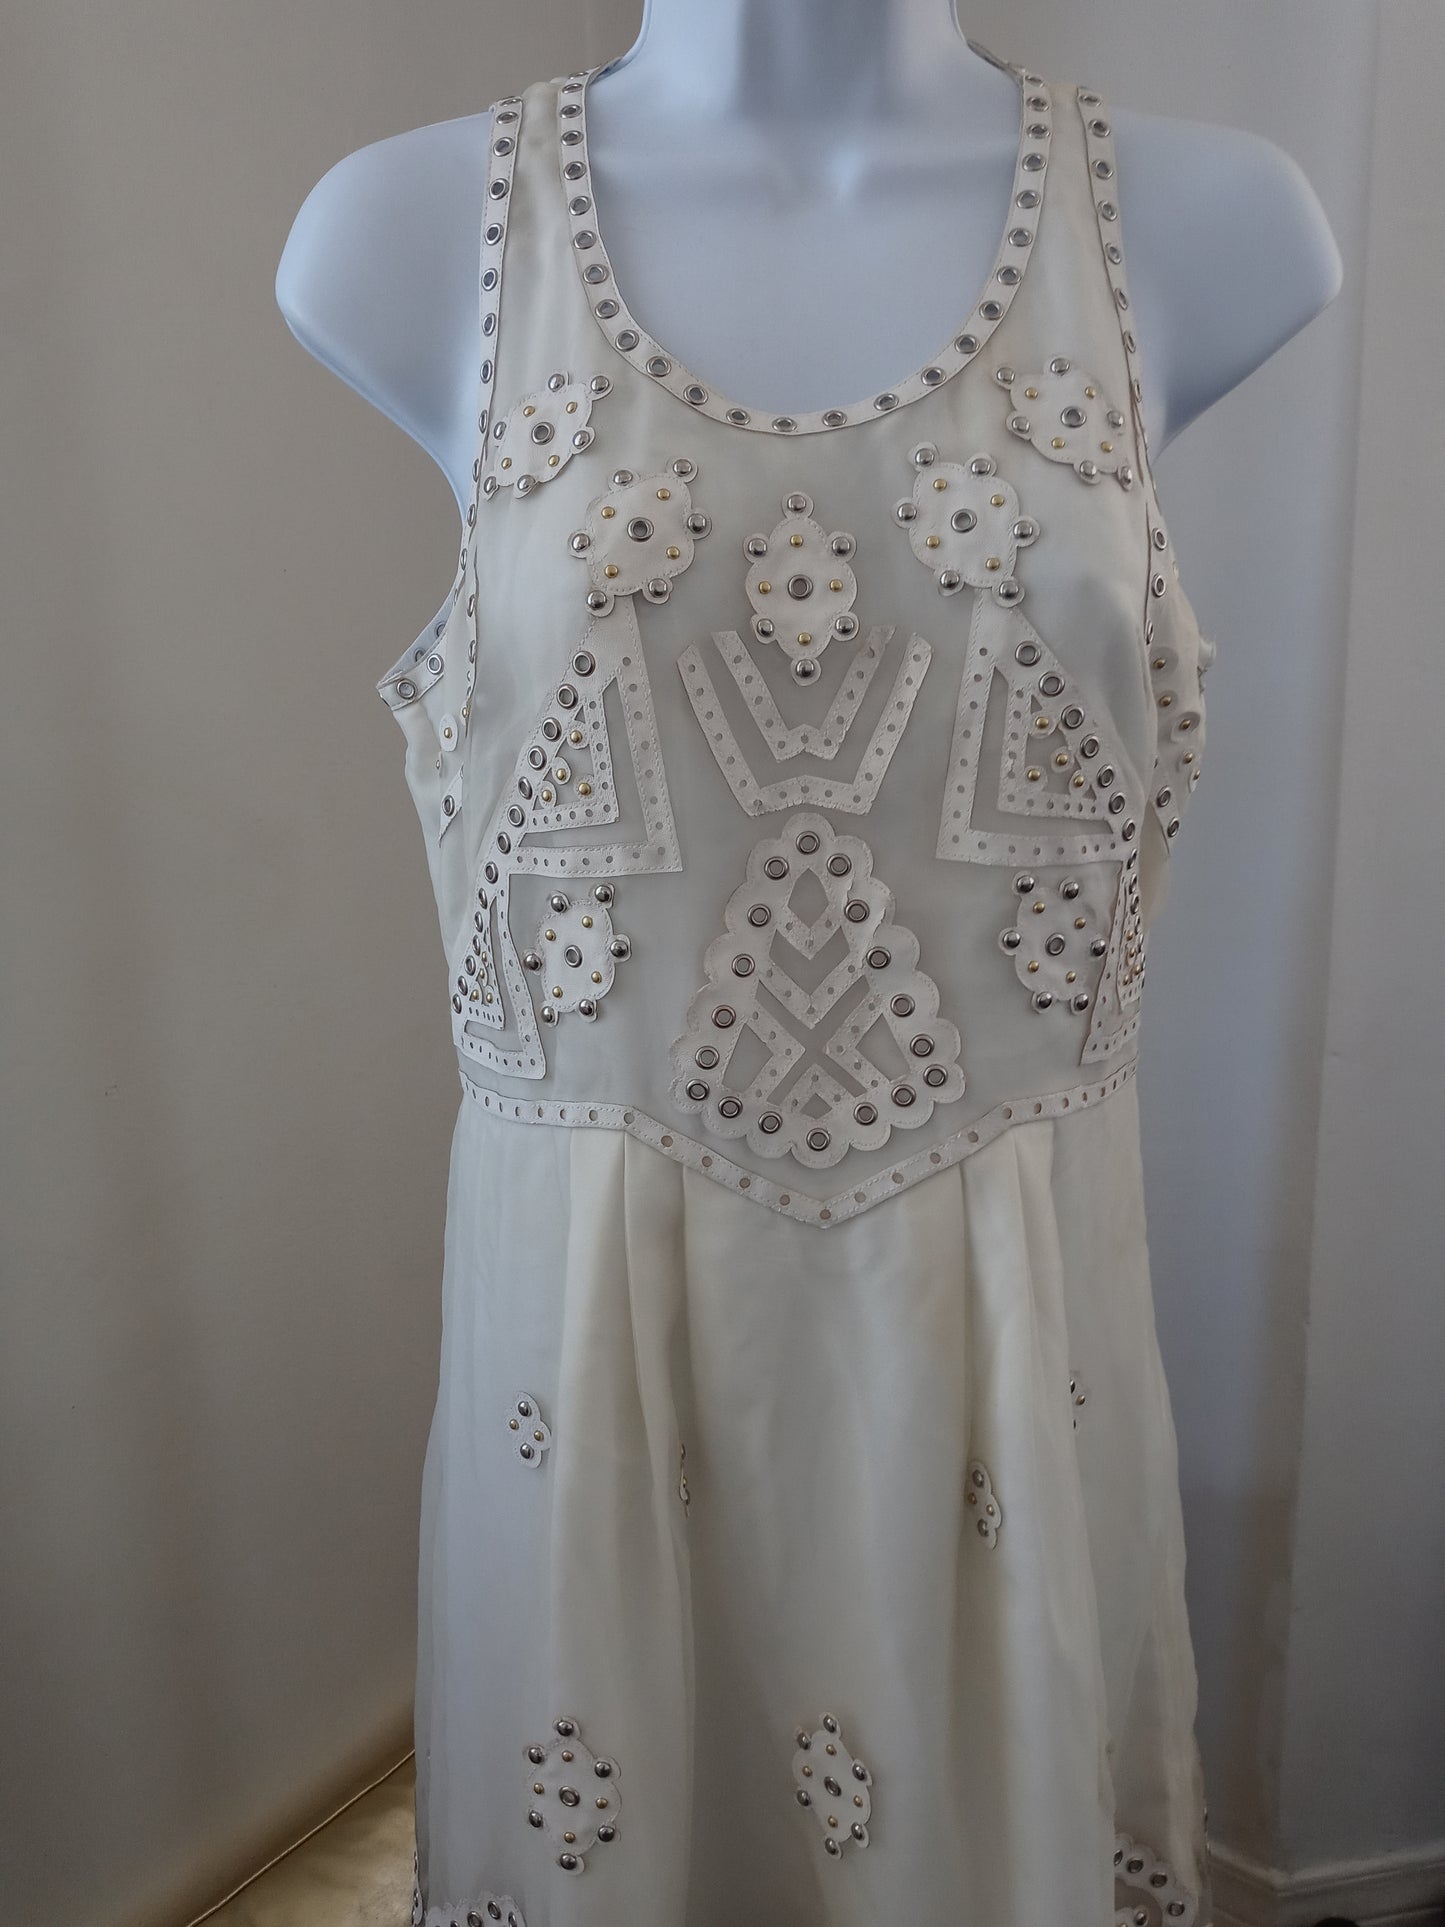 Juicy Couture Black Label Parchment SW Organza Studded Embellished Cream Color Dress -